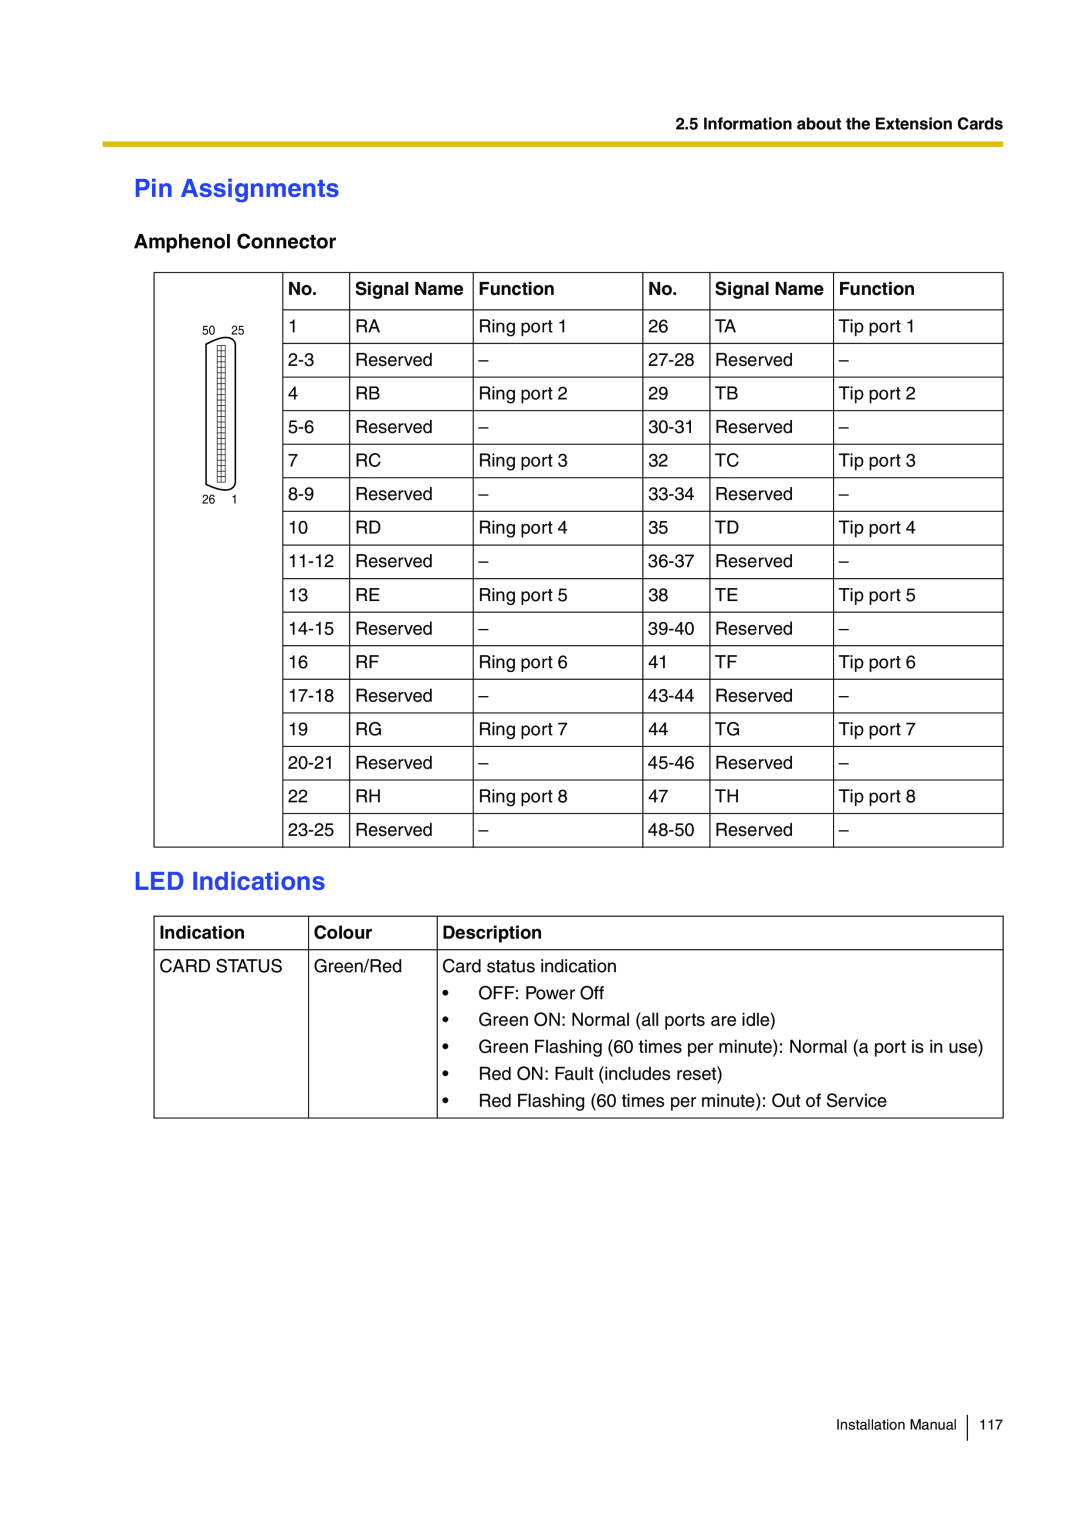 Panasonic KX-TDA100 Pin Assignments, LED Indications, Amphenol Connector, Signal Name, Function, Colour, Description 